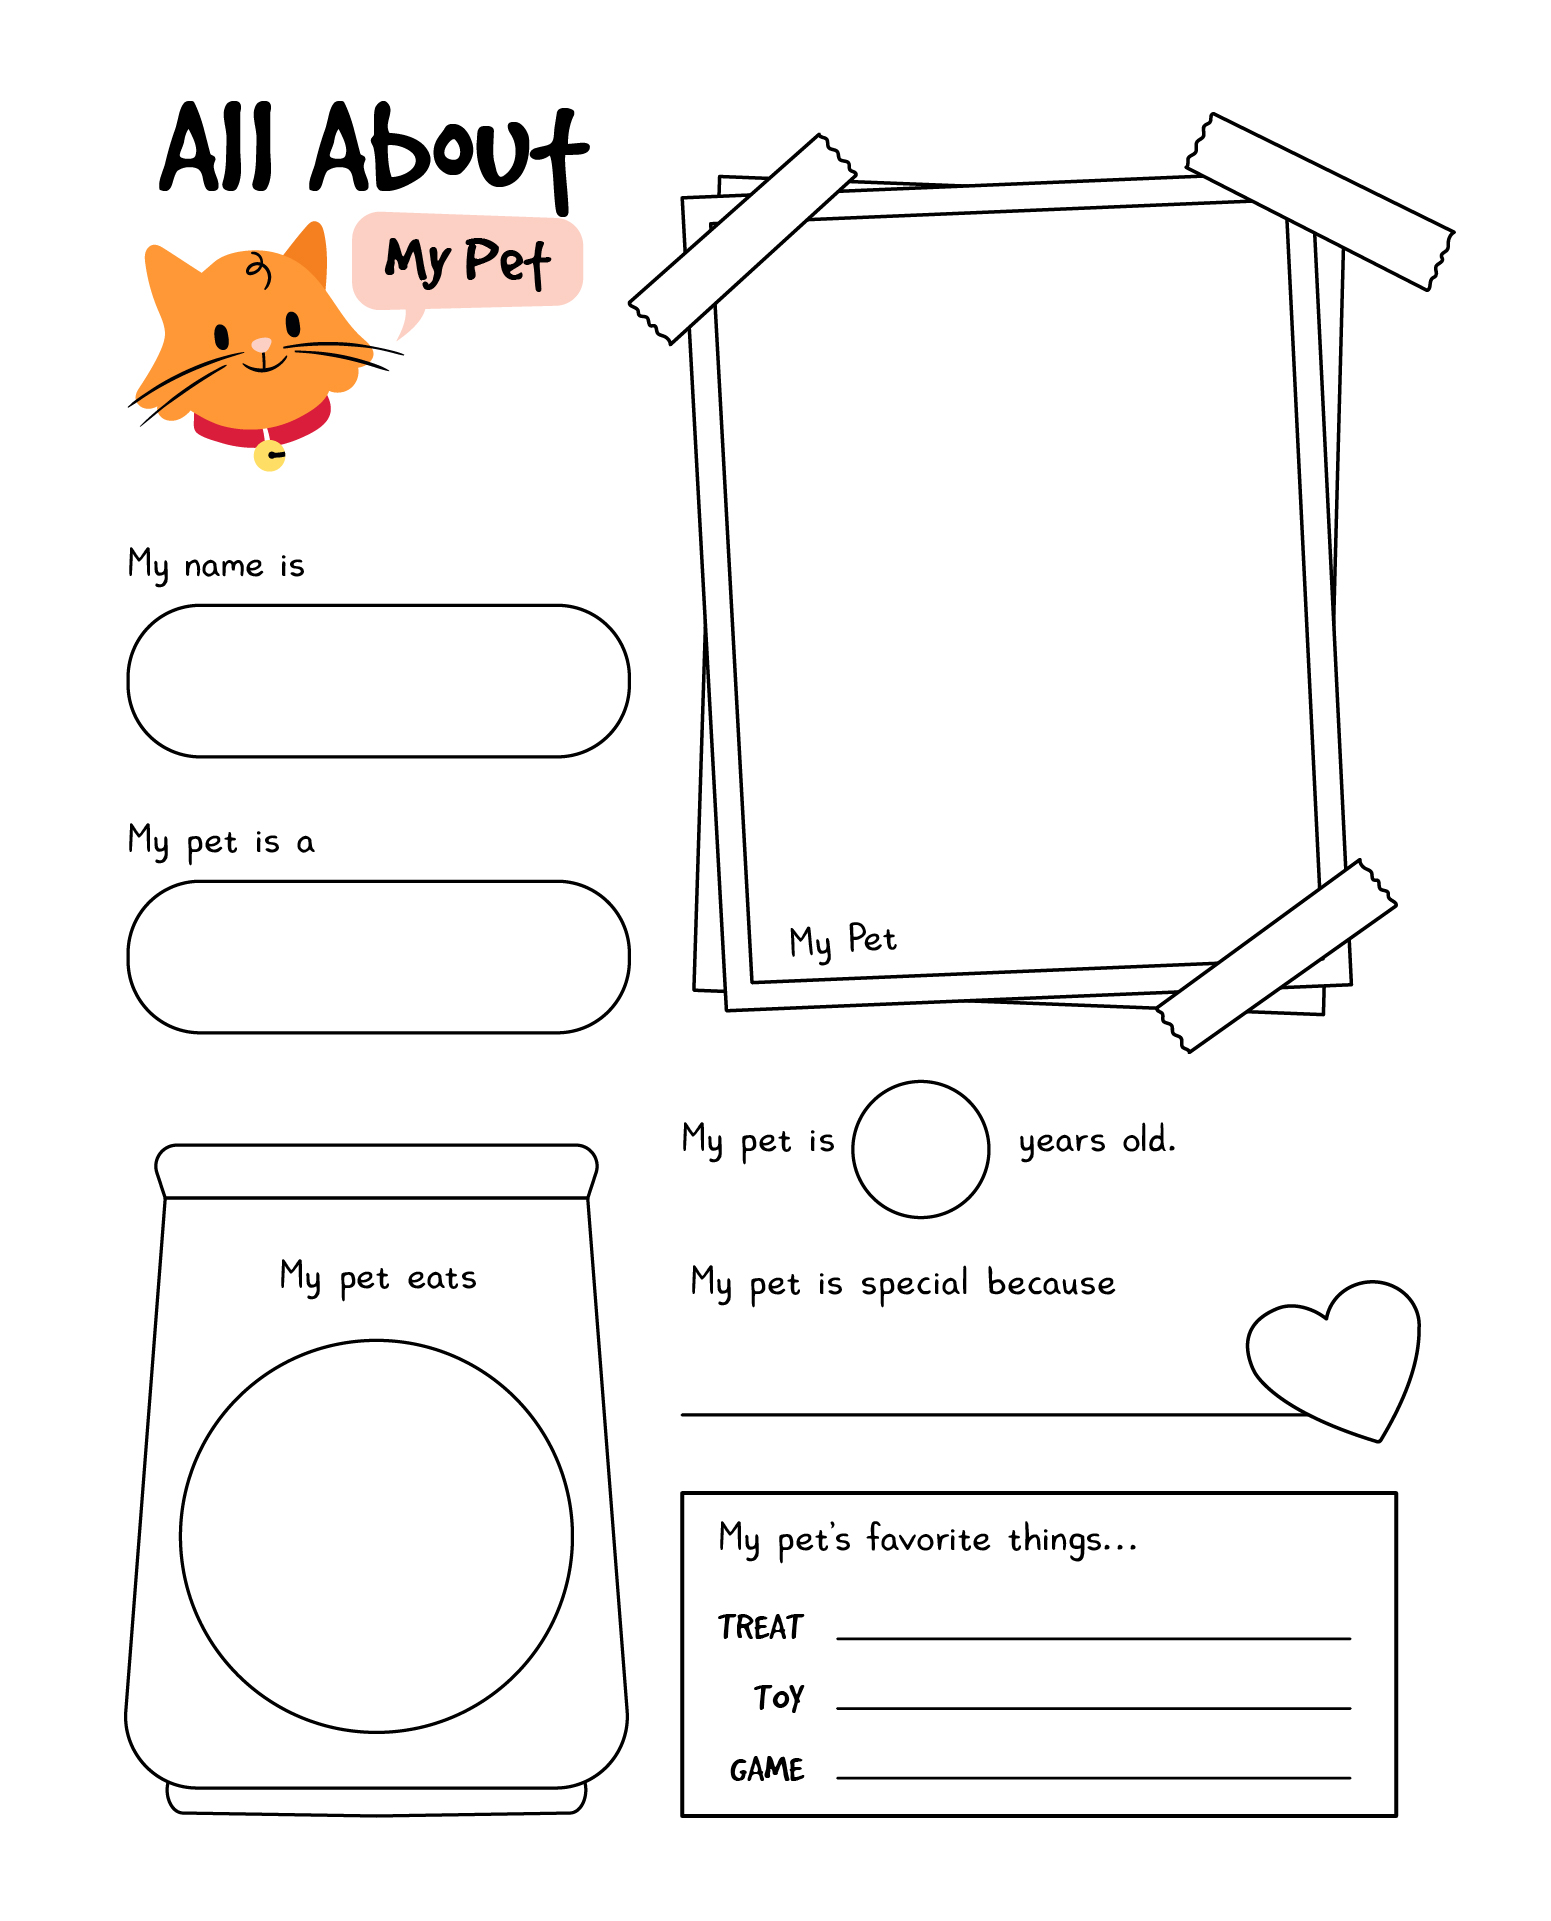 All About My Pet Printable Worksheet